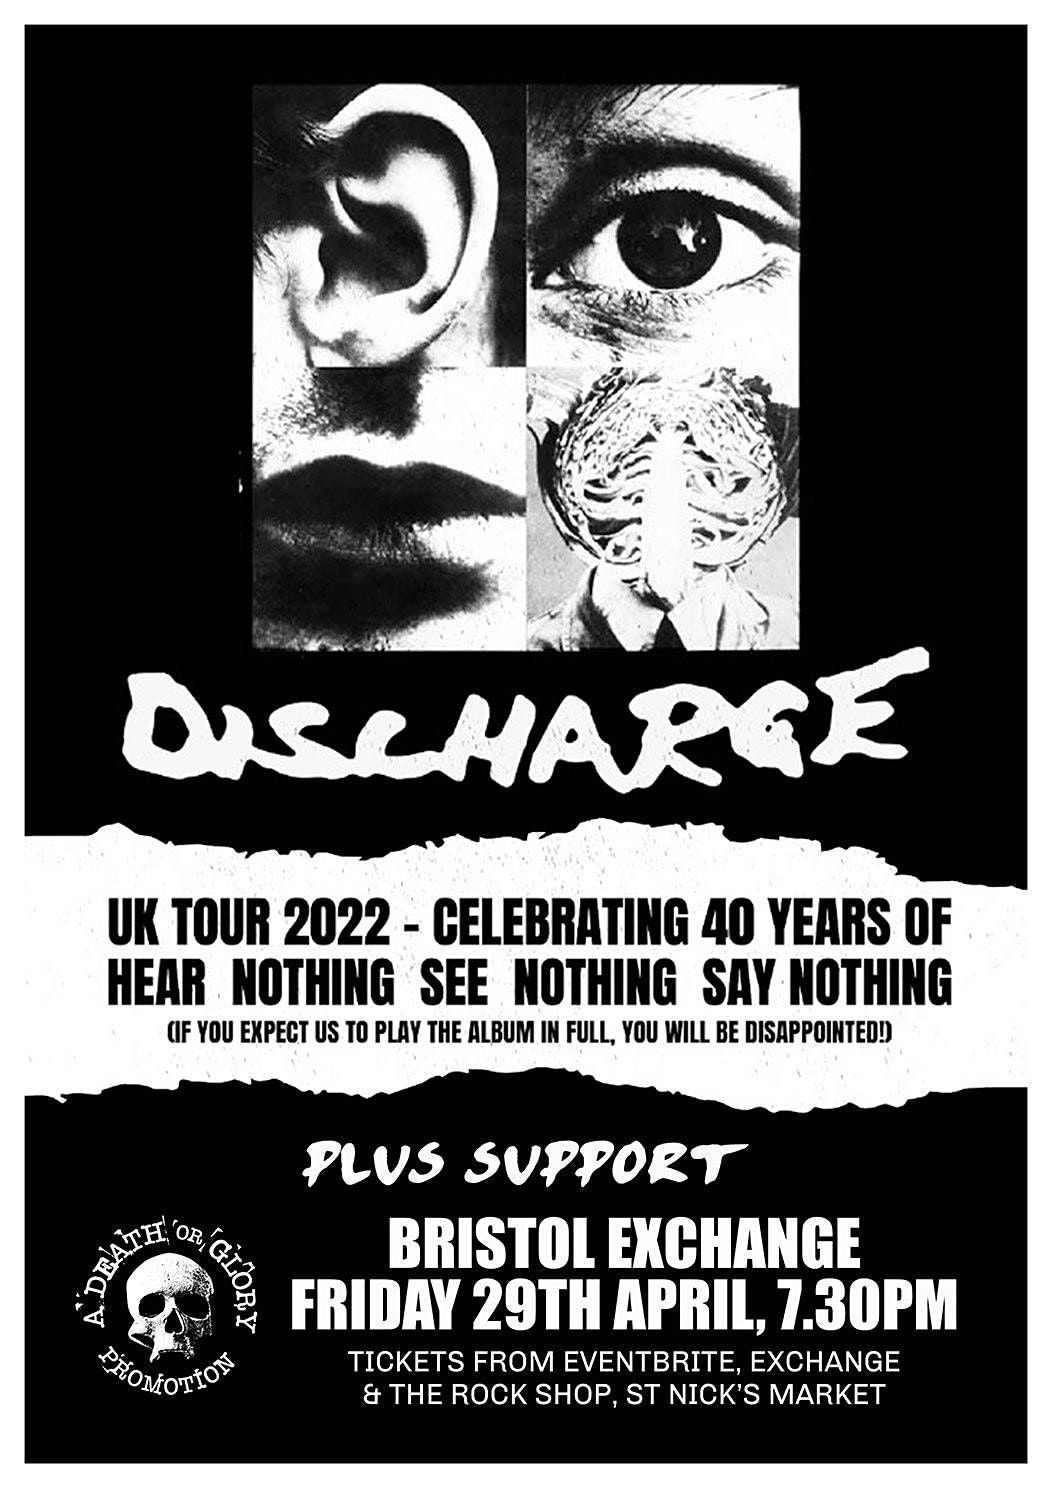 Discharge 'Celebrating 40 Years of Hear Nothing See Nothing Say Nothing'